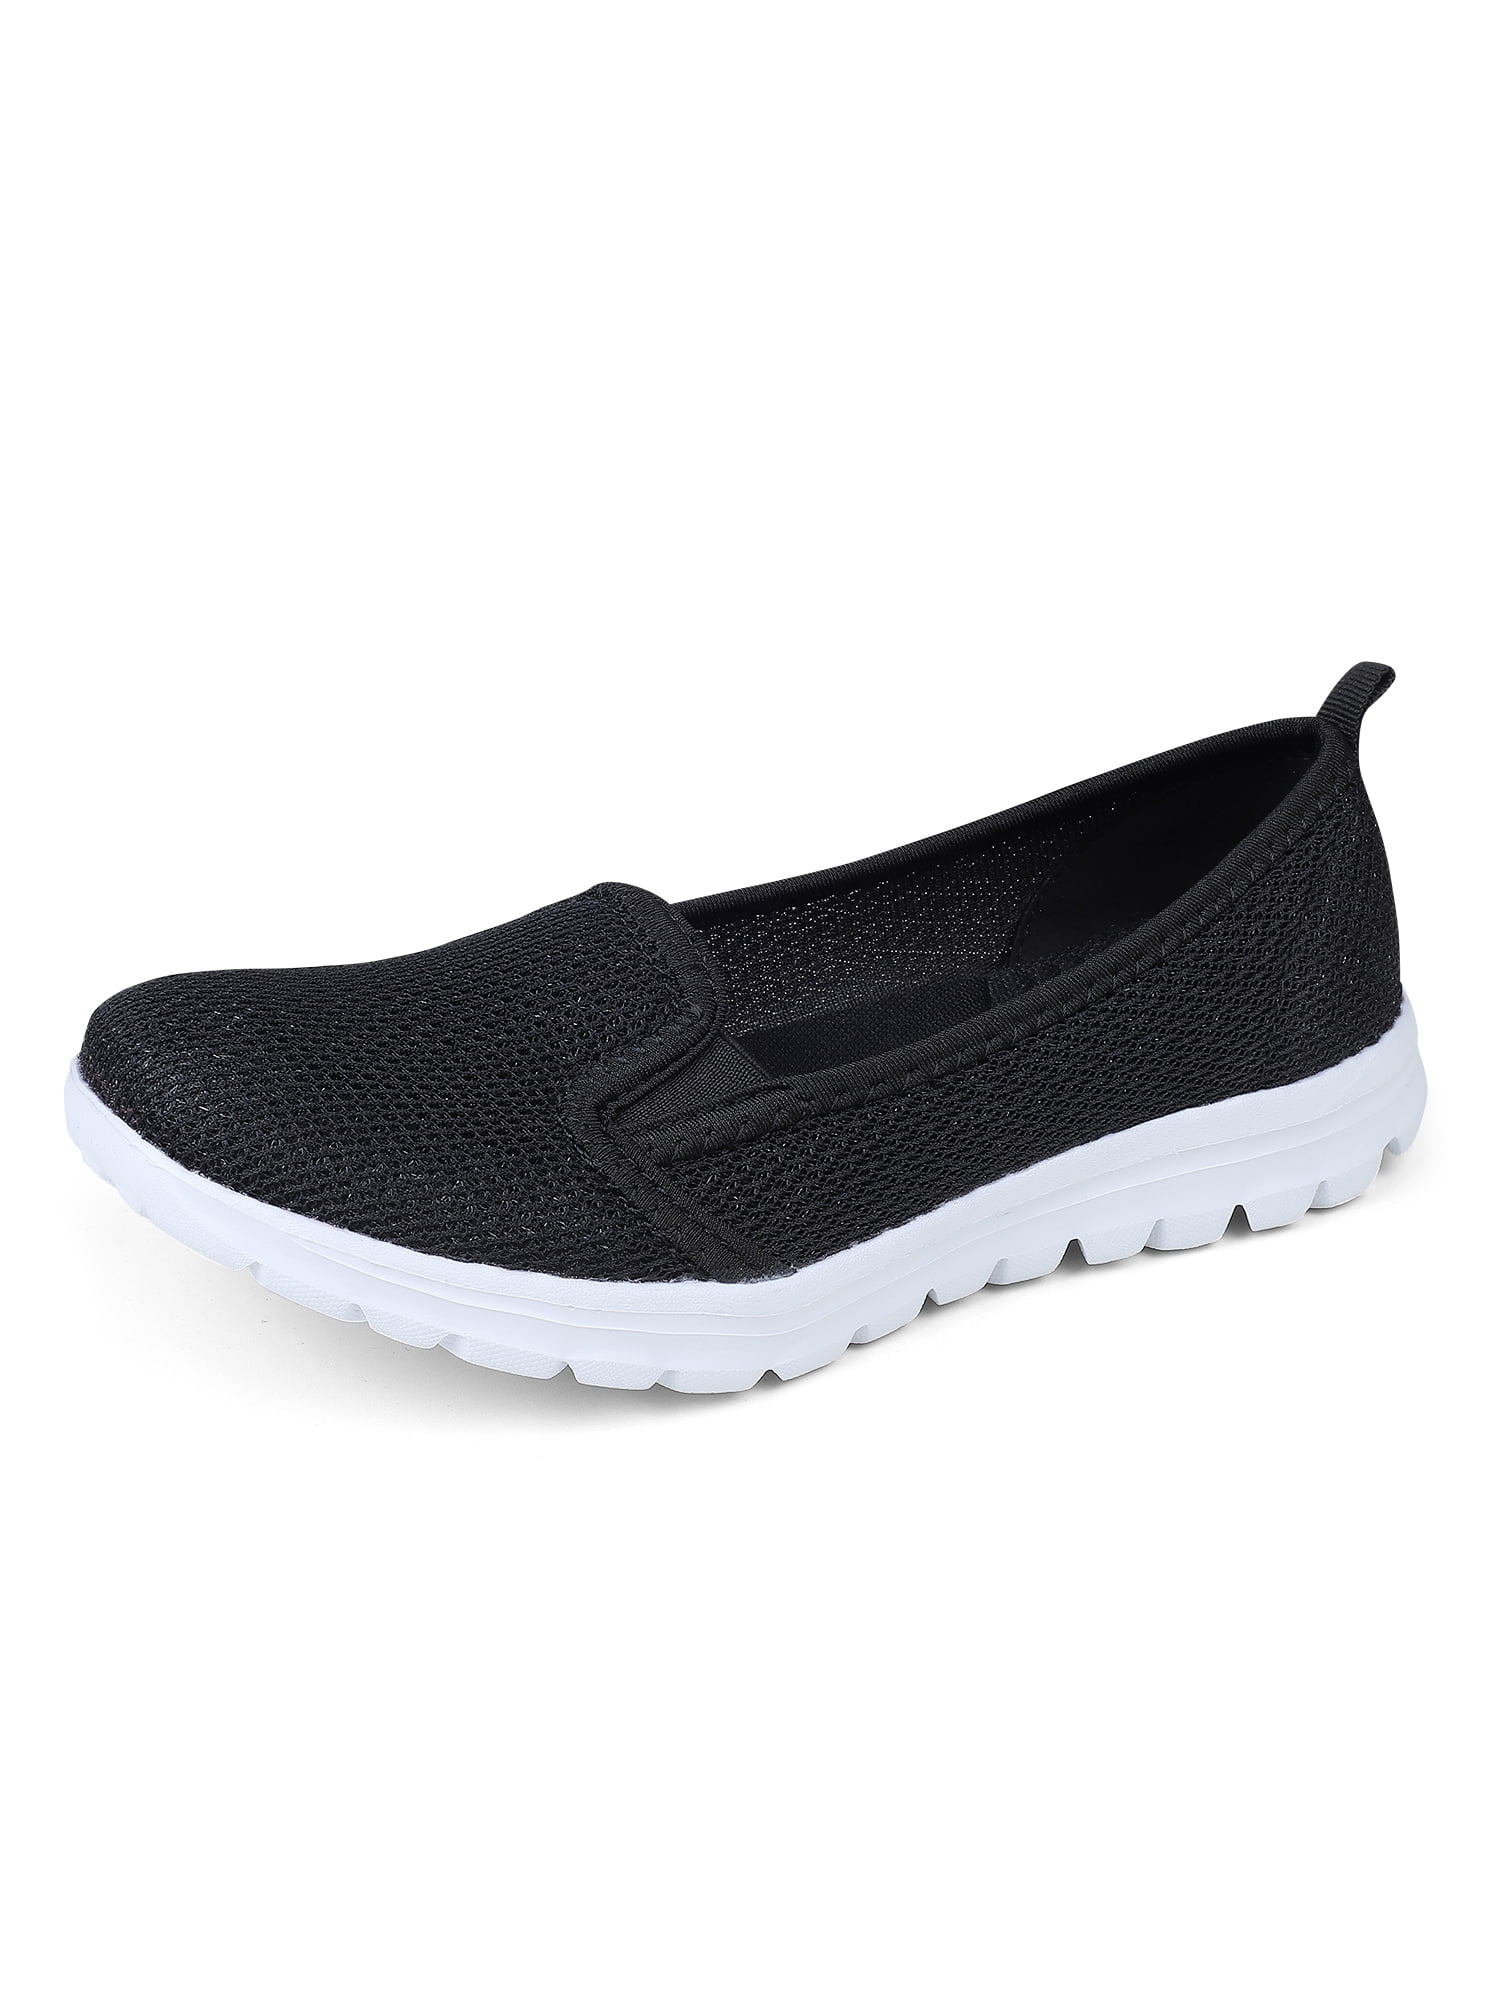 Daeful Womens Slip on Shoes Comfortable Flats Walking Shoes Casual ...